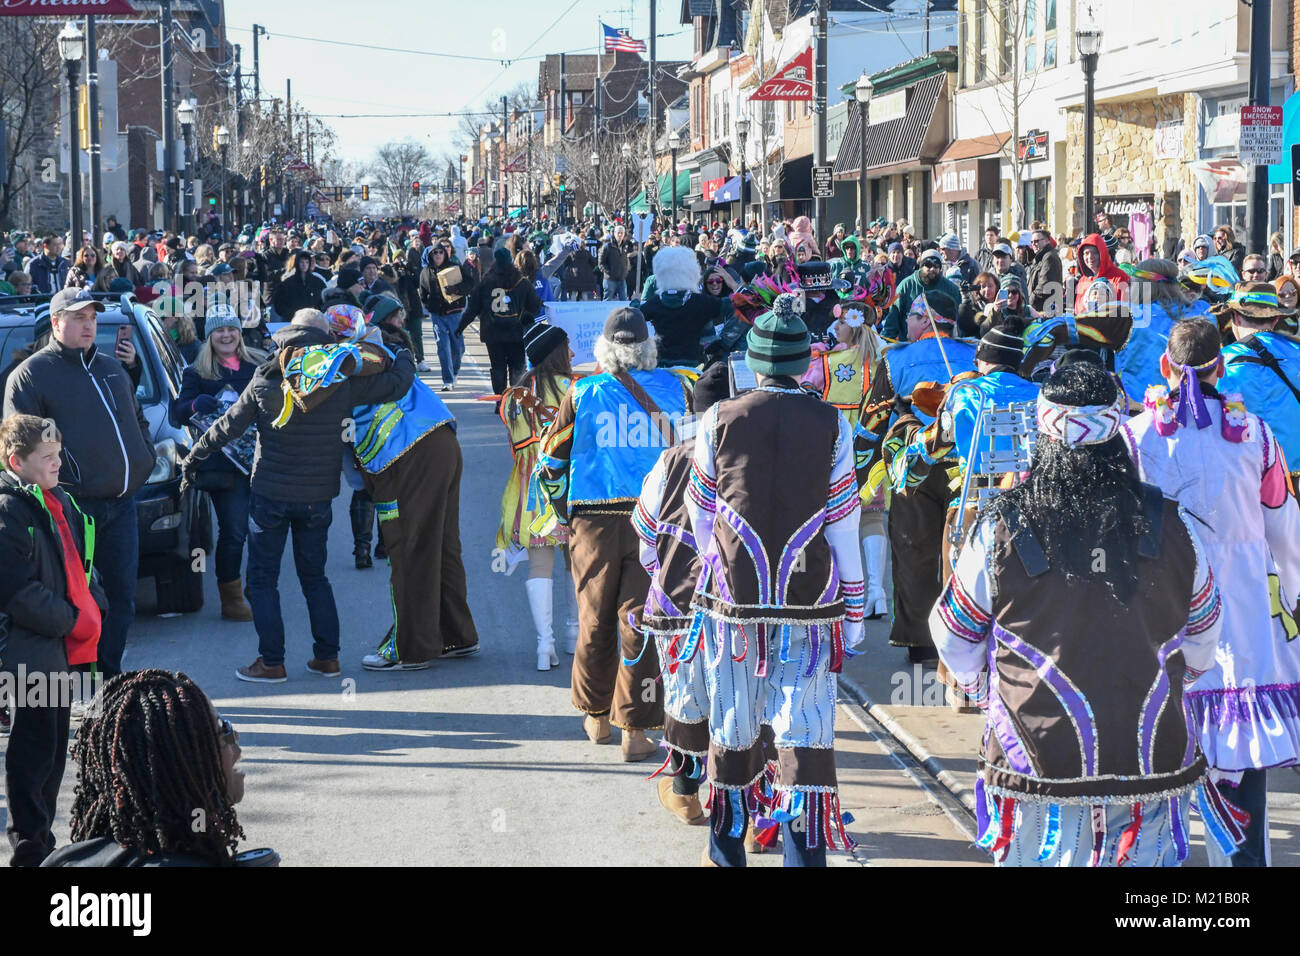 Media, PA, USA, Thousands of Philadelphia Eagles fans line the streets of Media for a rally supporting the NFC Championship Philadelphia Eagles in their pursuit of winning the NFL Super Bowl. A mummers string band entertains pep rally attendees | Media, Delaware County, PA is located approximately 14 miles South of Philadelphia, PA. Temperatures in the mid 20 degree range (fahrenheit) Credit: Don Mennig/Alamy Live News Stock Photo